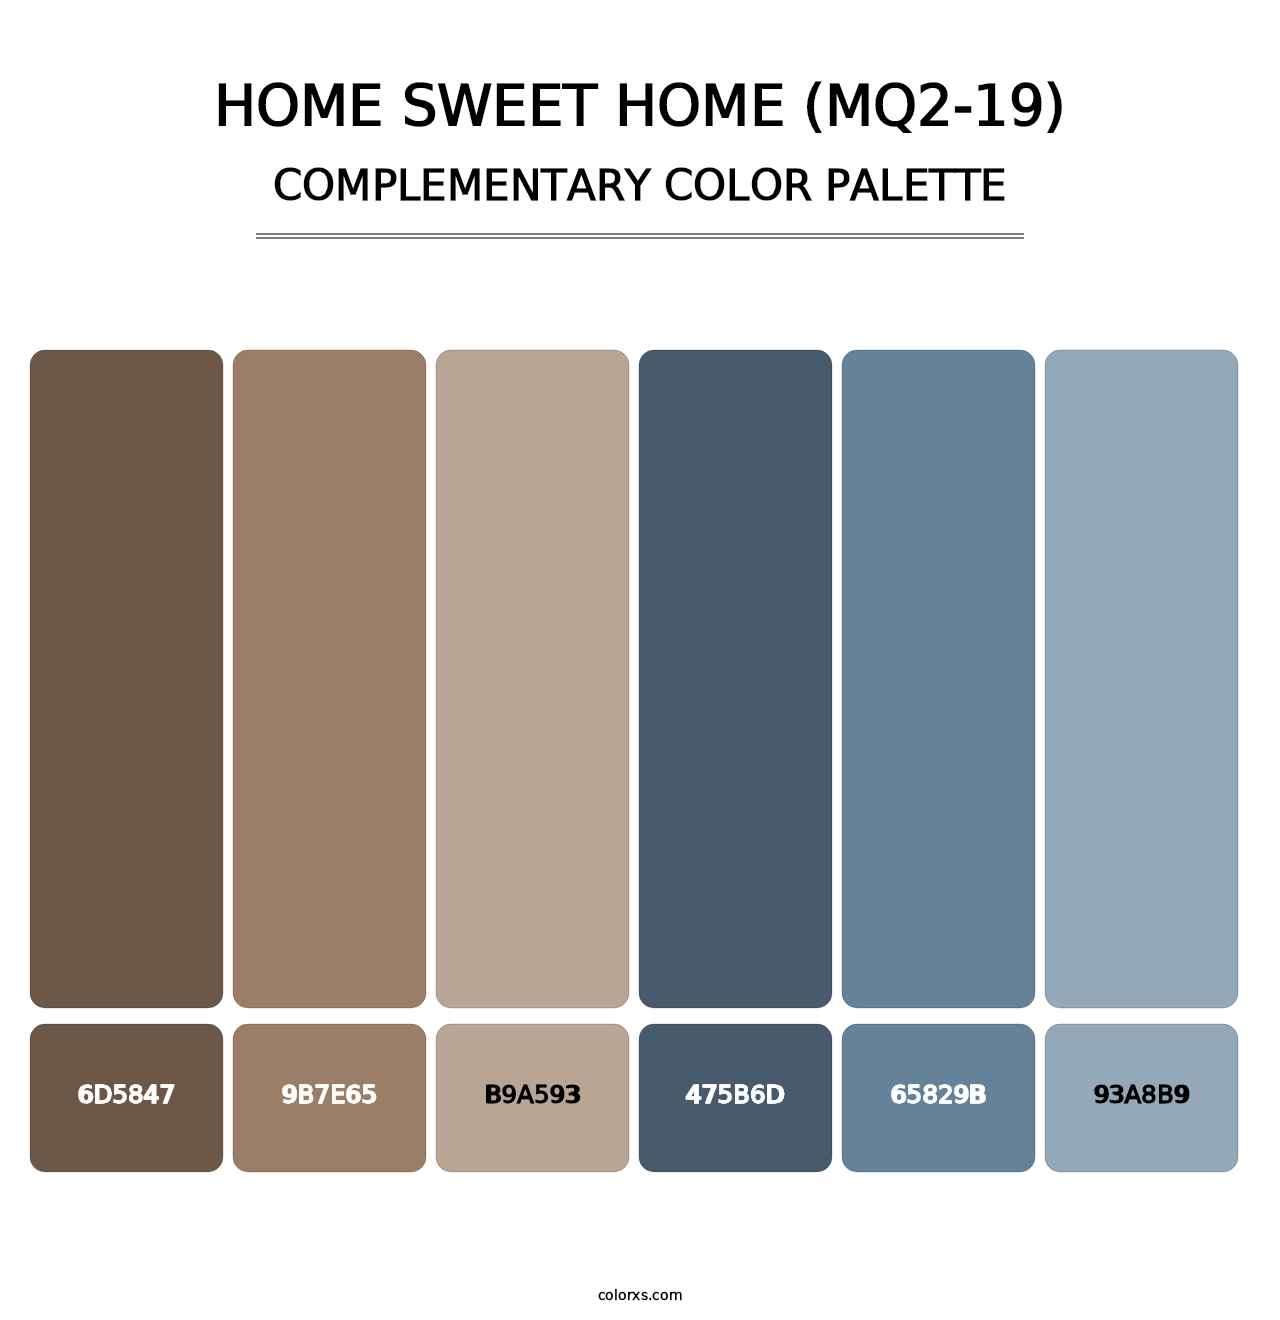 Home Sweet Home (MQ2-19) - Complementary Color Palette